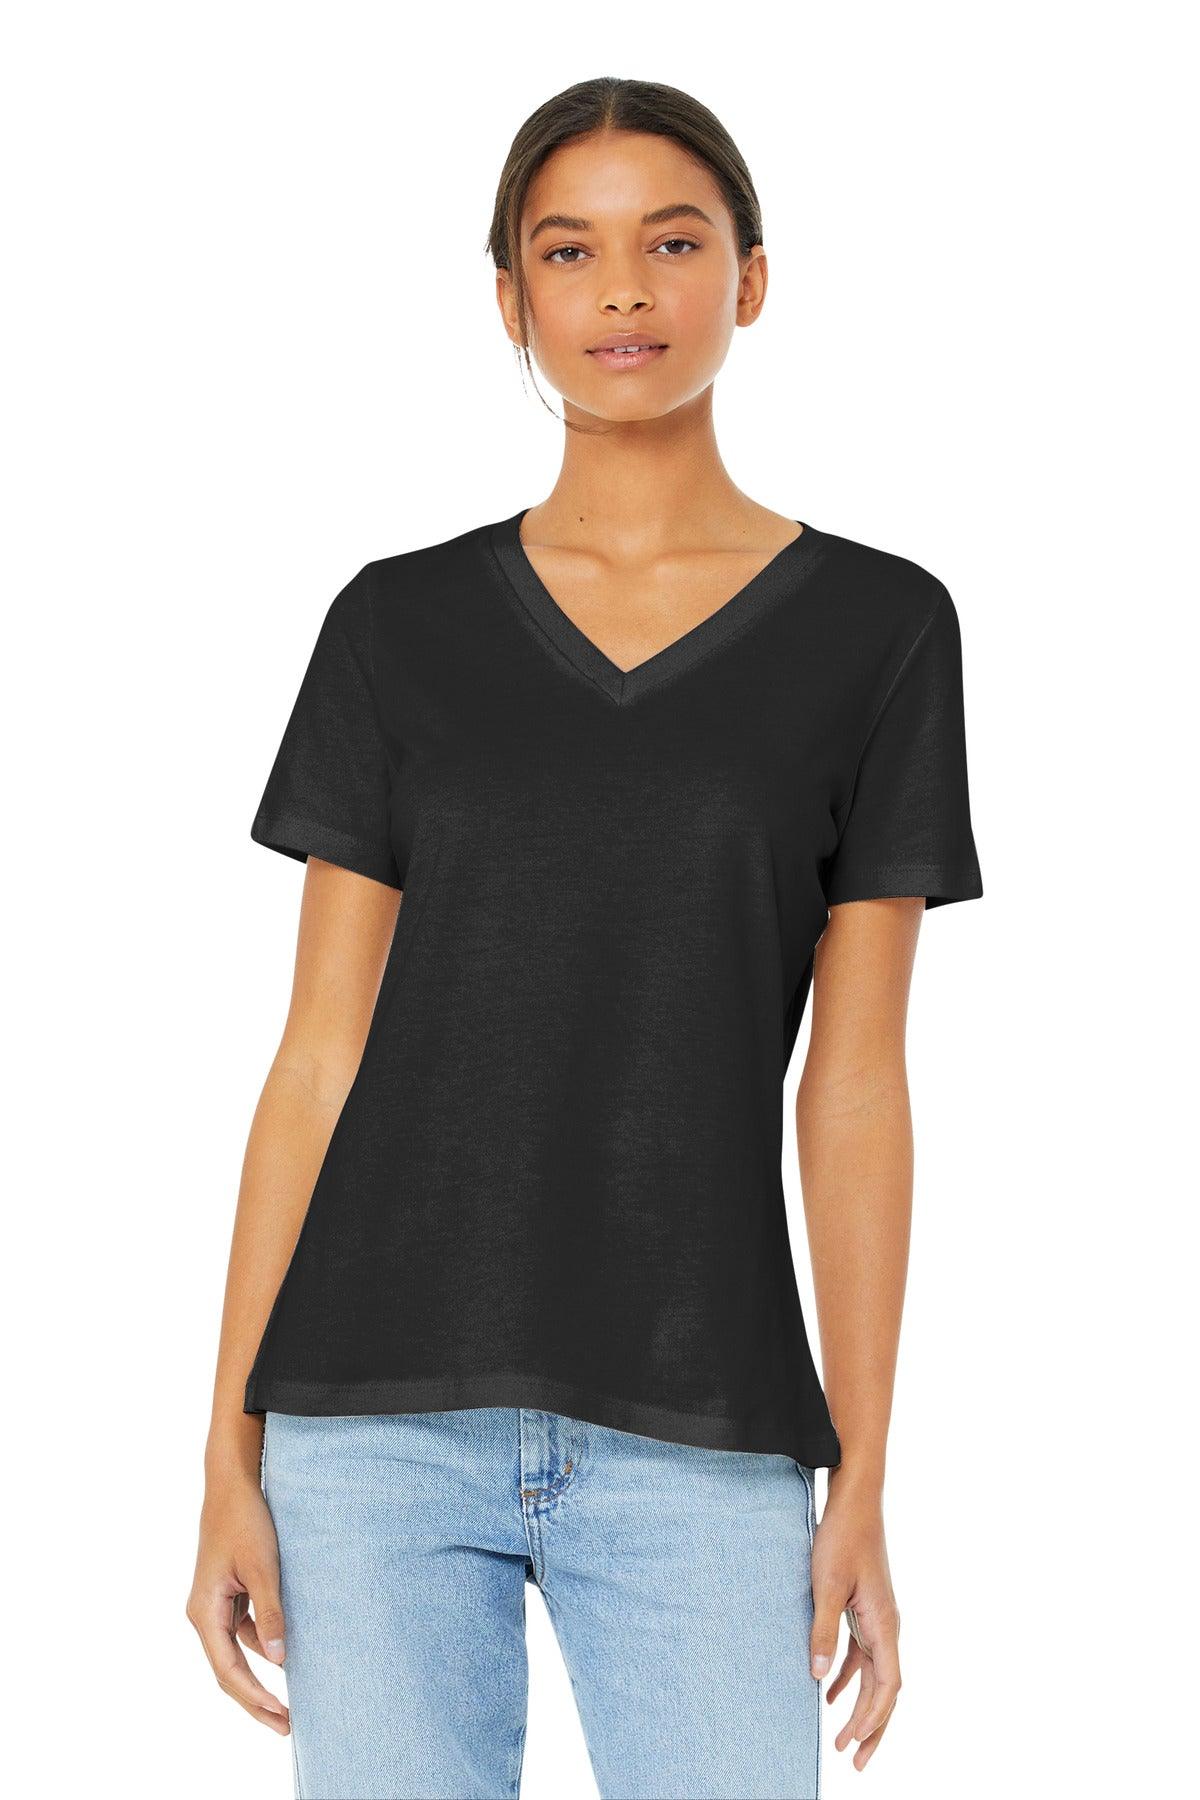 BELLA+CANVAS Women's Relaxed Jersey Short Sleeve V-Neck Tee. BC6405 - Dresses Max